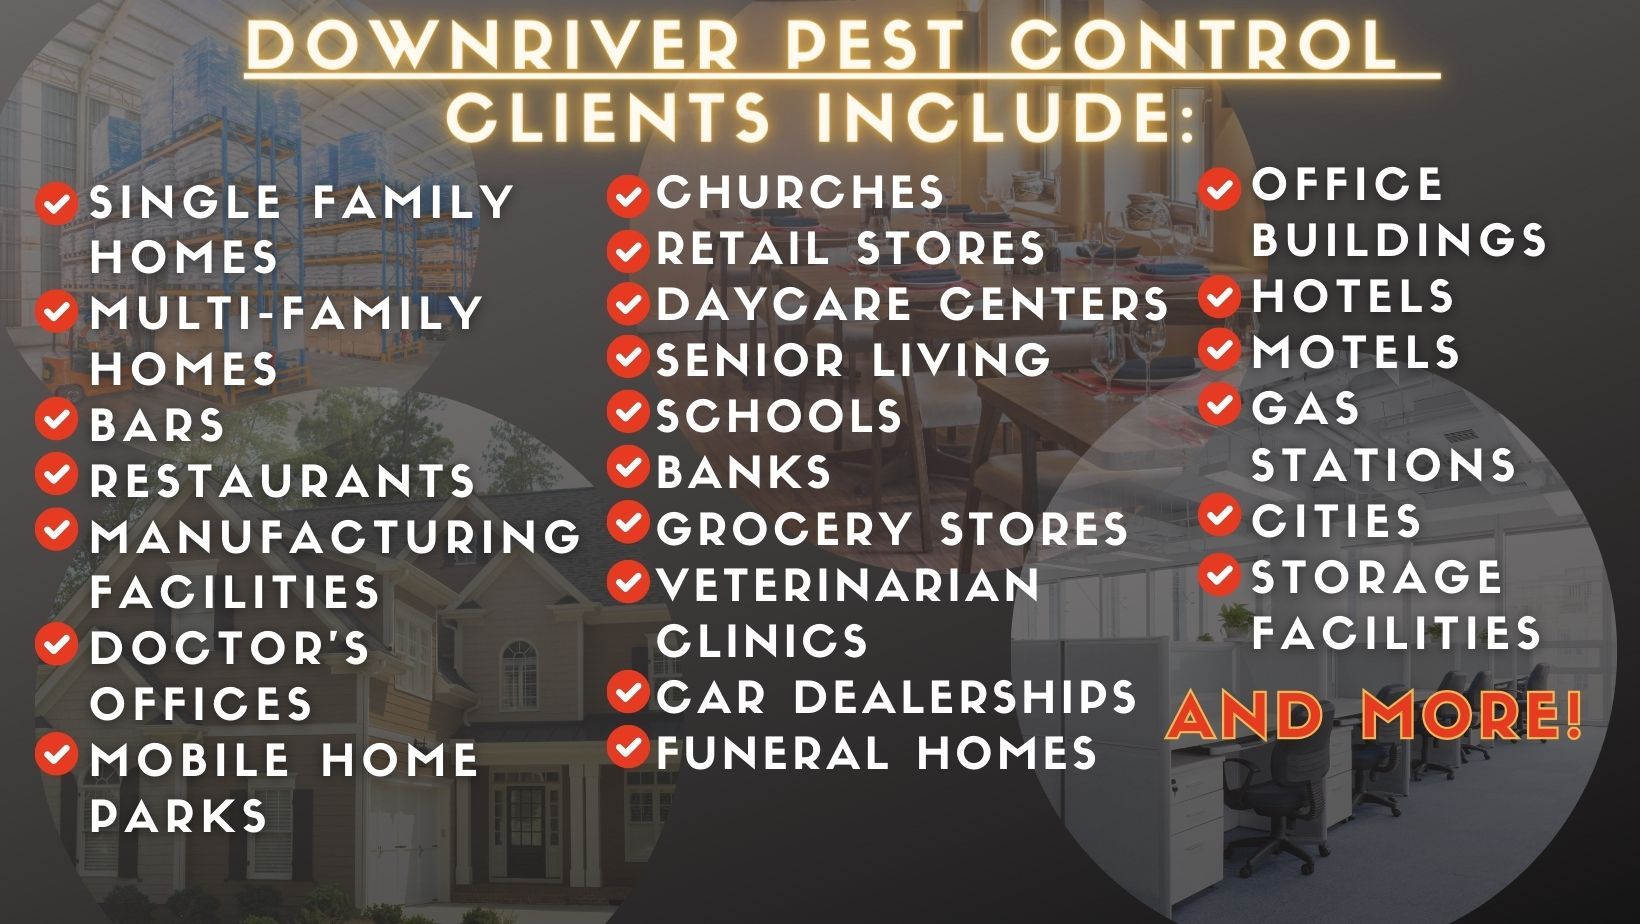 Downriver Pest Control Clients Include: Single Family Homes, Multi-Family Homes, Bars, Restaurants, Manufacturing Facilities, Doctors Offices, Mobile Home Parks, Churches, Retail Stores, Daycare Centers, Senior Living, Schools, Banks 
Grocery Stores, Veterinarian Clinics, Car Dealerships, Funeral Homes, Office Buildings, Hotels, Motels, Gas Stations, Cities, Storage Facilities, And More.